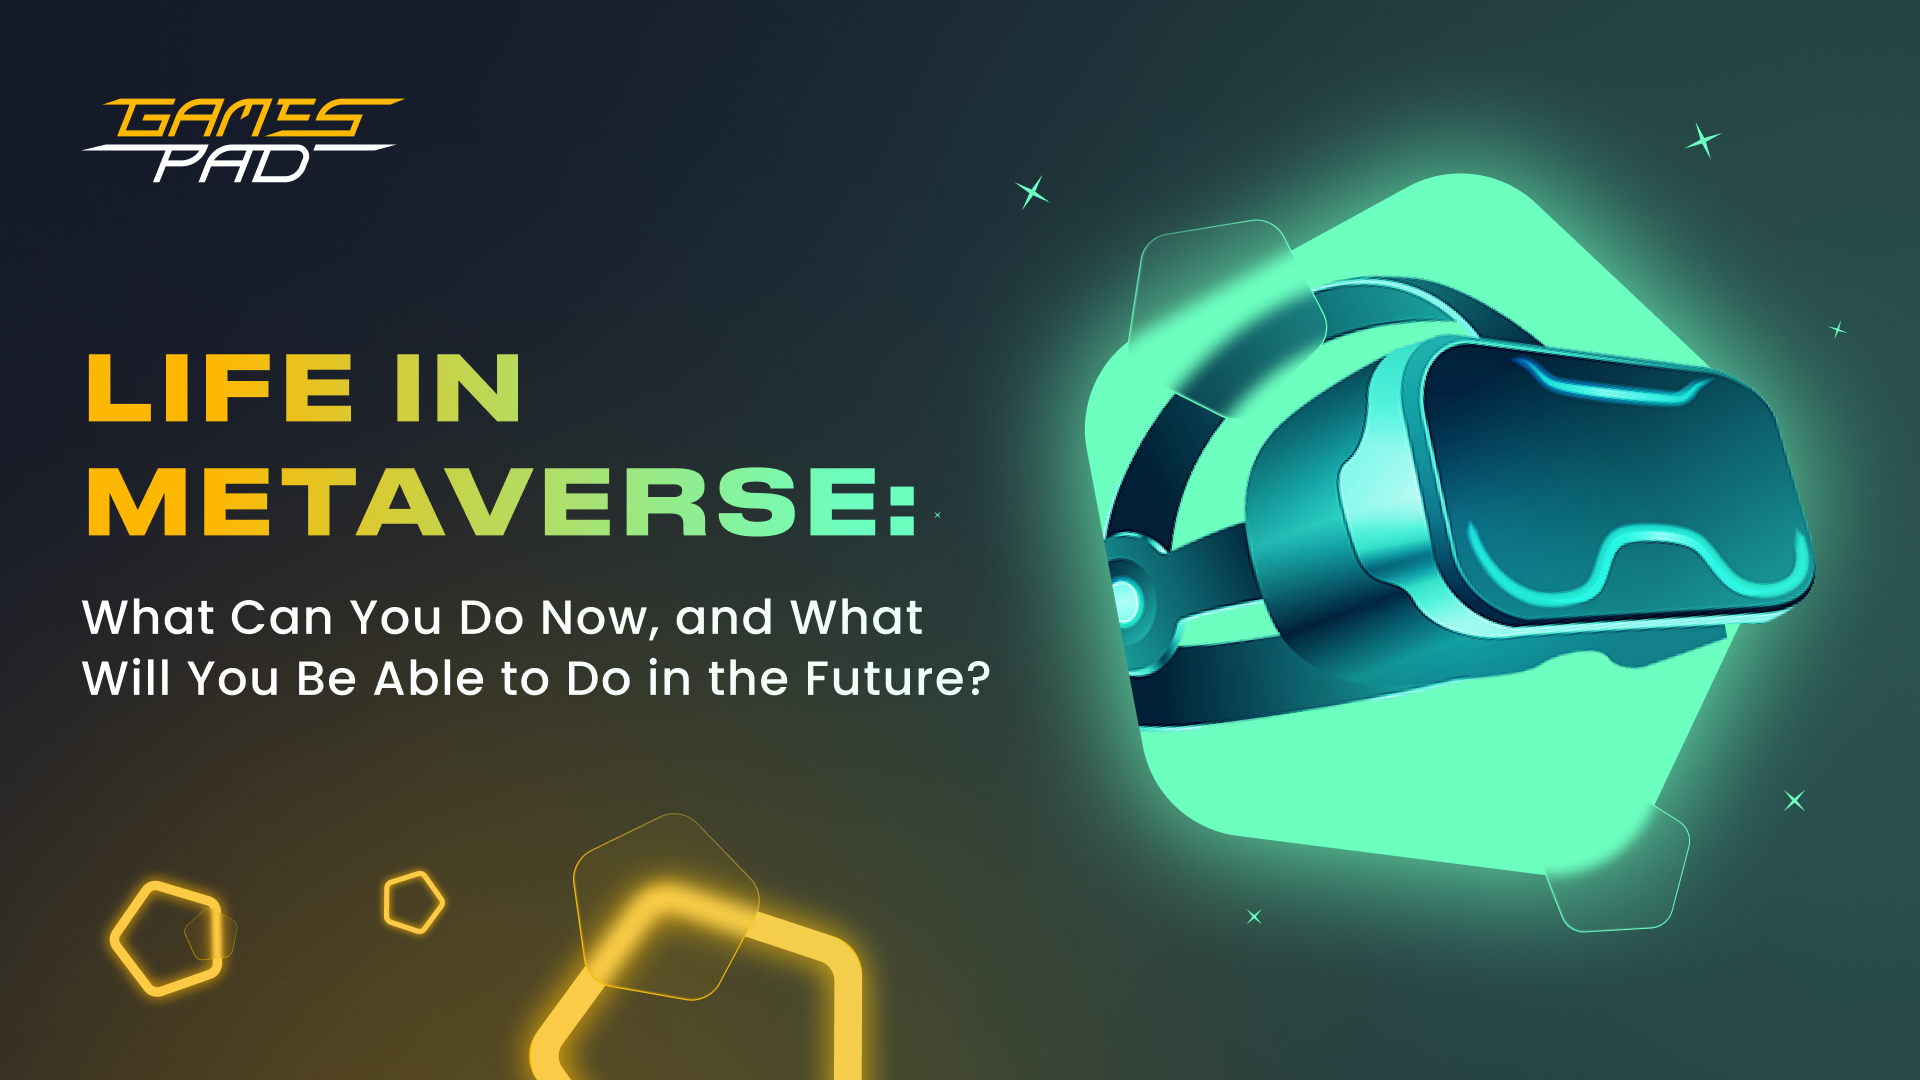 Life in Metaverse: What Can You Do Now, and What Will You Be Able to Do in the Future?